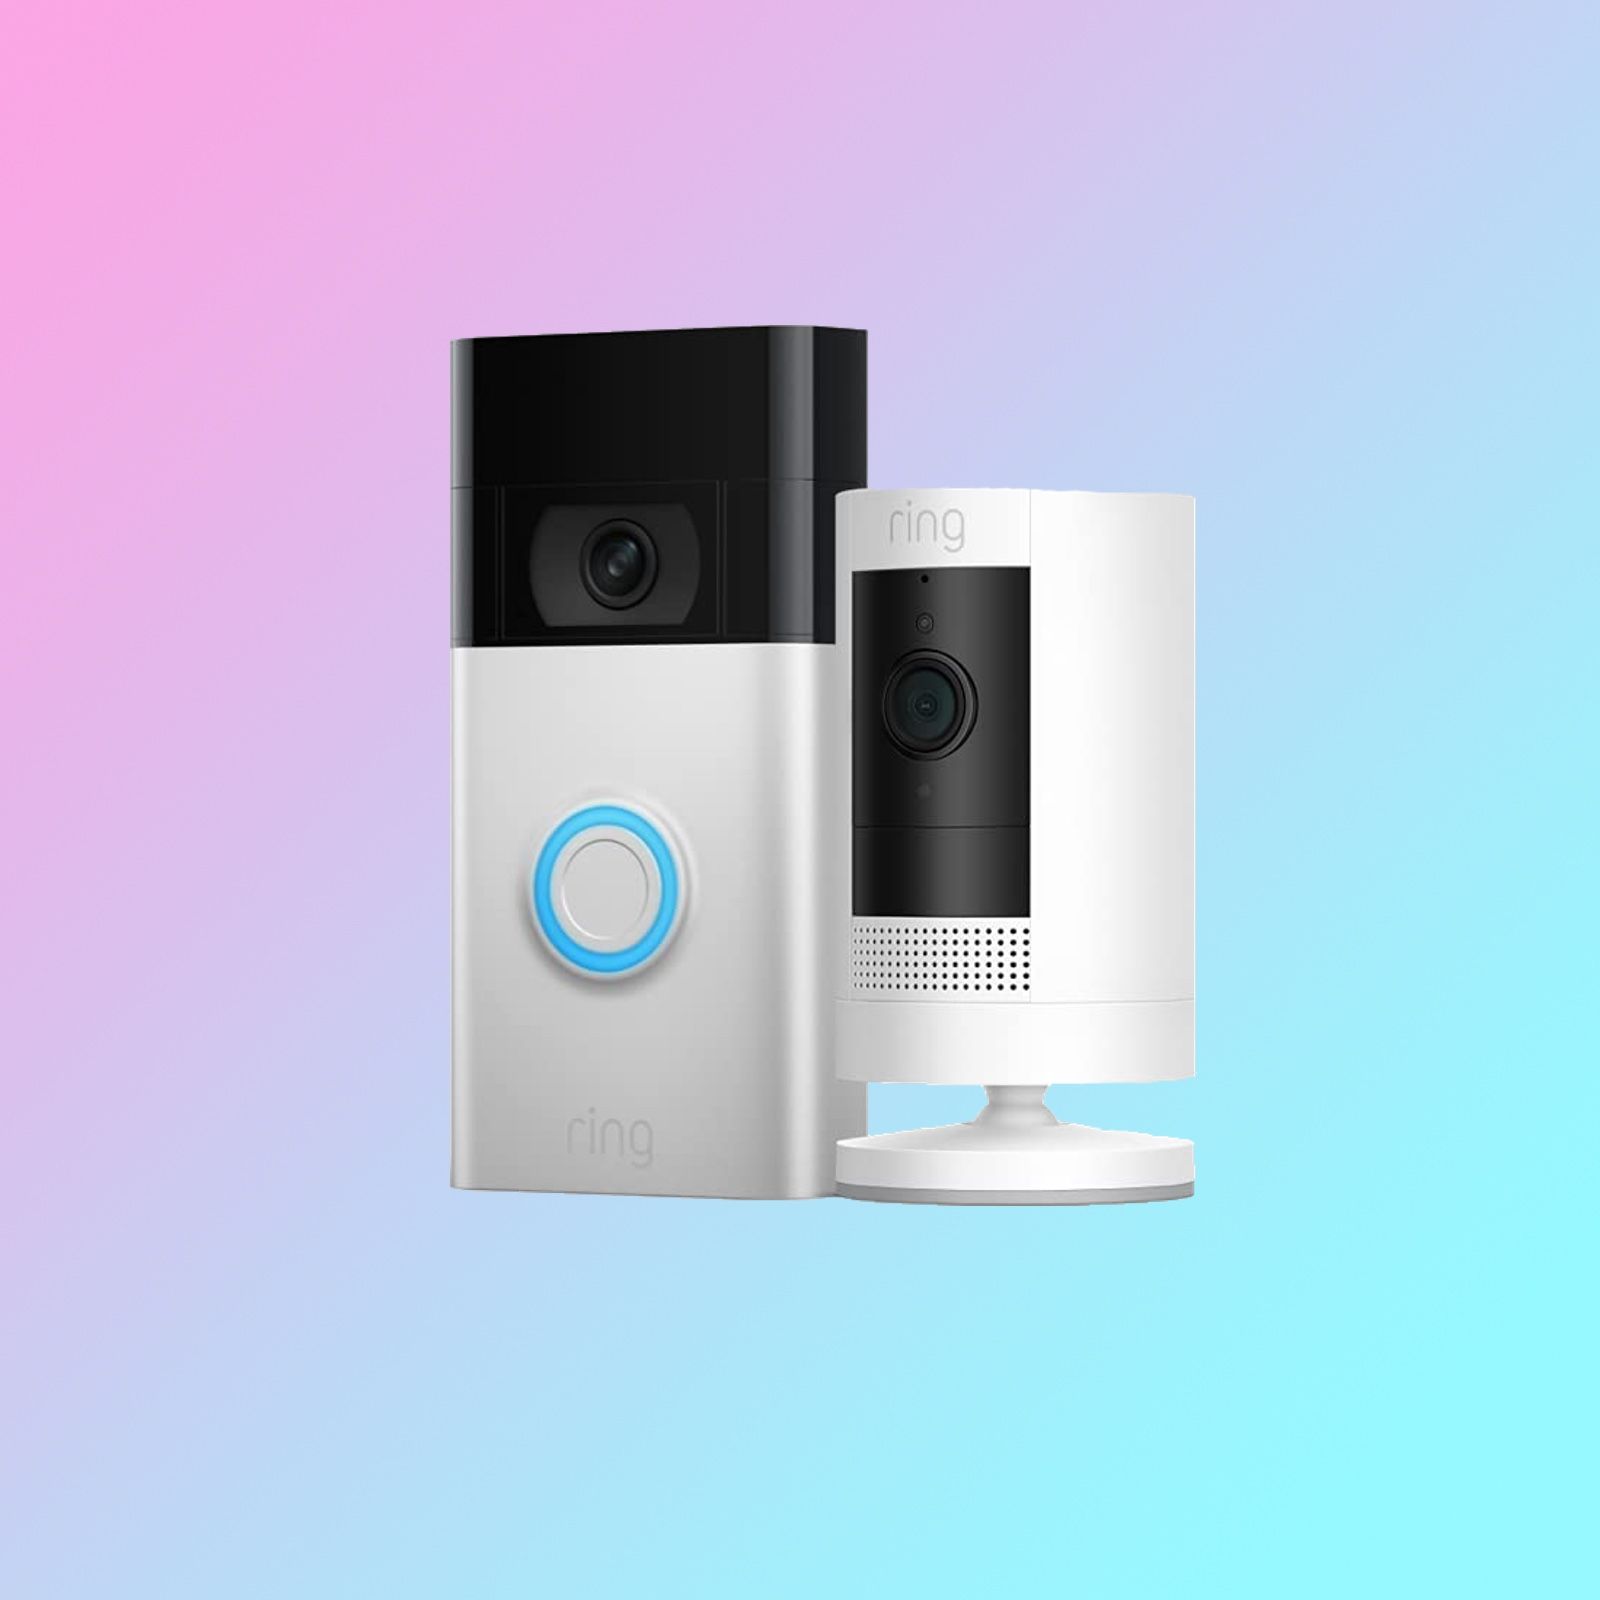 Best Prime Day Ring deals - Ring Video Doorbell + Ring Stick Up Cam